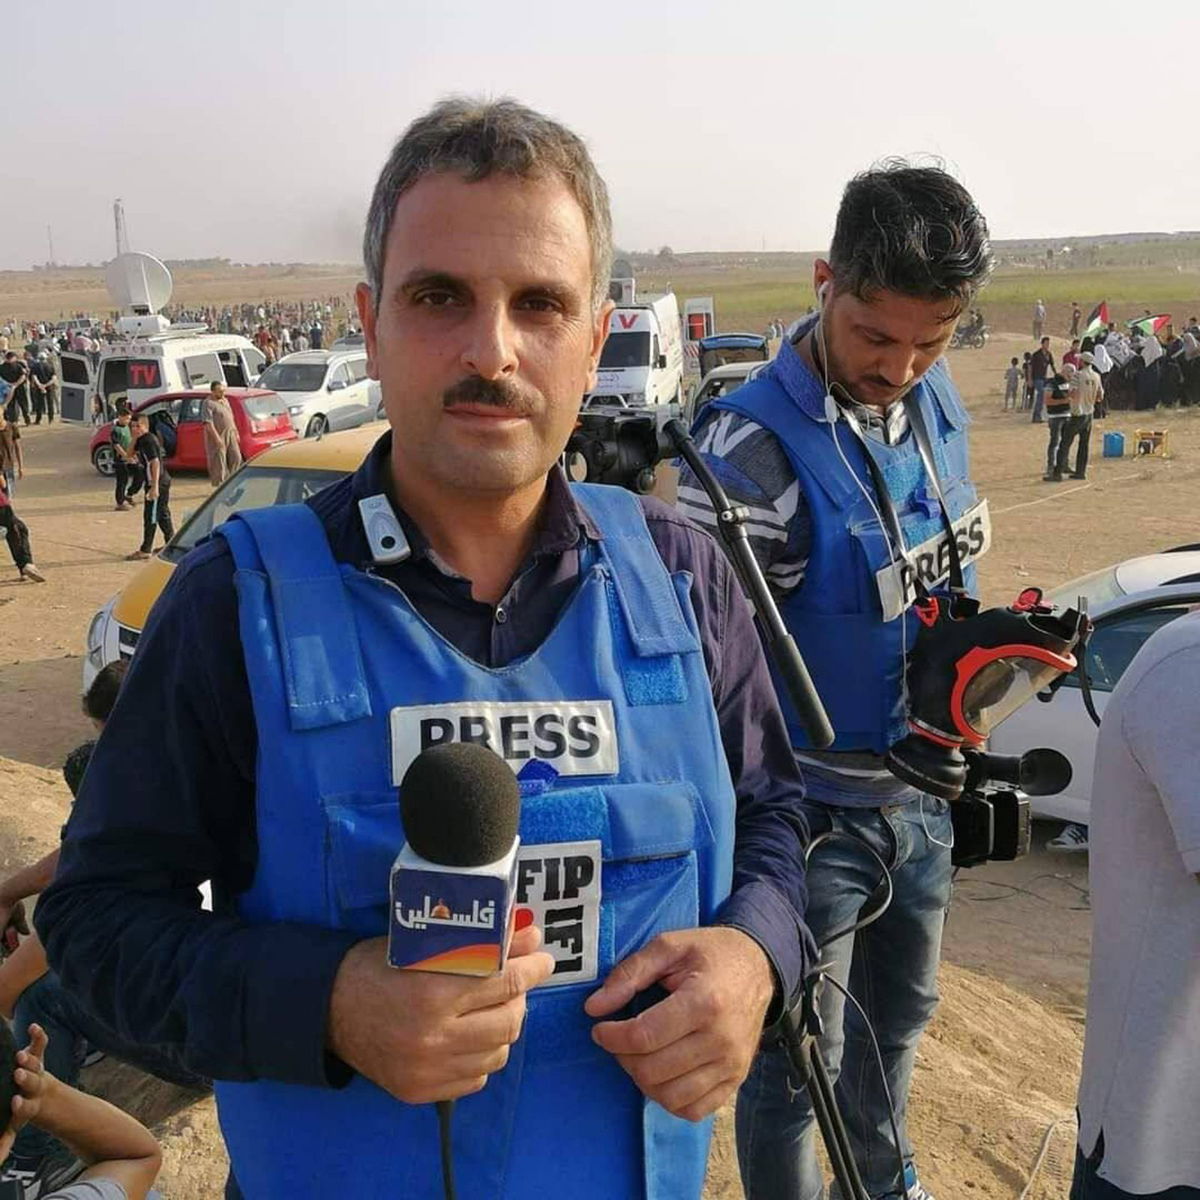 <i>Palestine TV</i><br/>Palestine TV journalist Salman Al Bashir takes off his vest and helmet while giving an emotional on-air report after the death of fellow Palestine TV correspondent